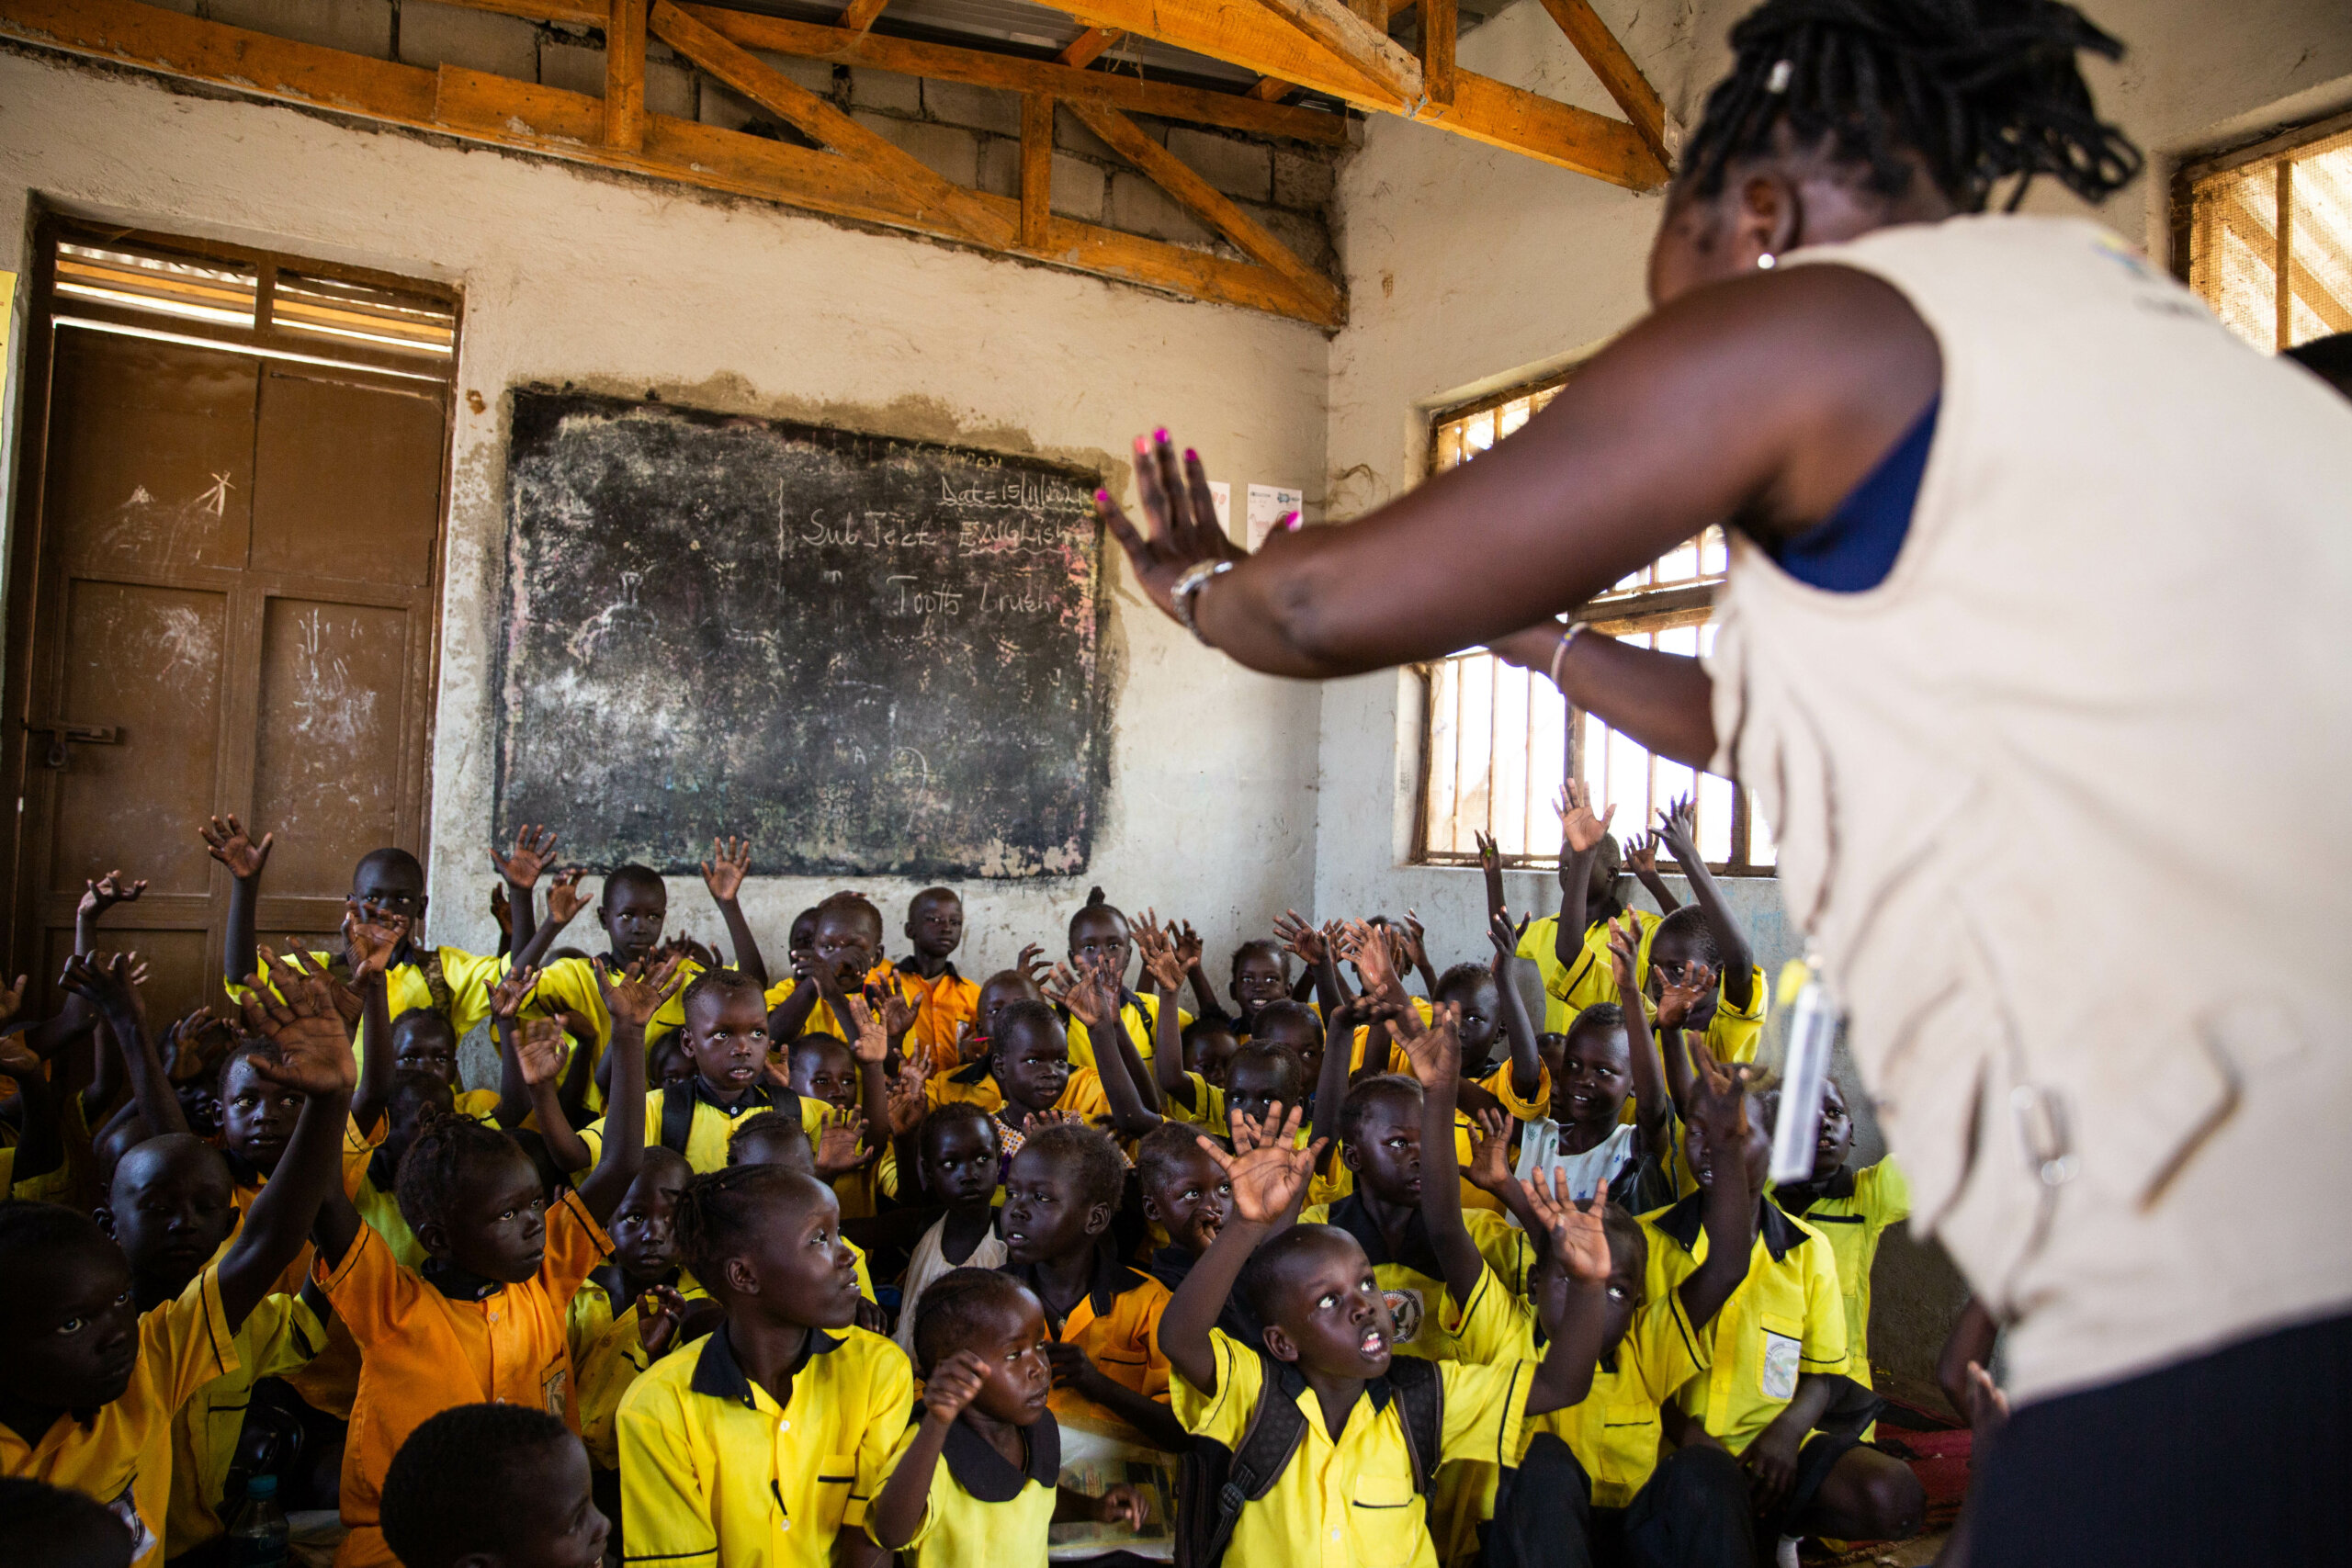 A classroom of learners sitting together on a carpet on the floor of a community nursery class in an IDP camp in Juba, South Sudan, whilst their teacher stands in front of them, signing. The teacher has her back to the camera and raises both her hands, which the children are copying her sign language.